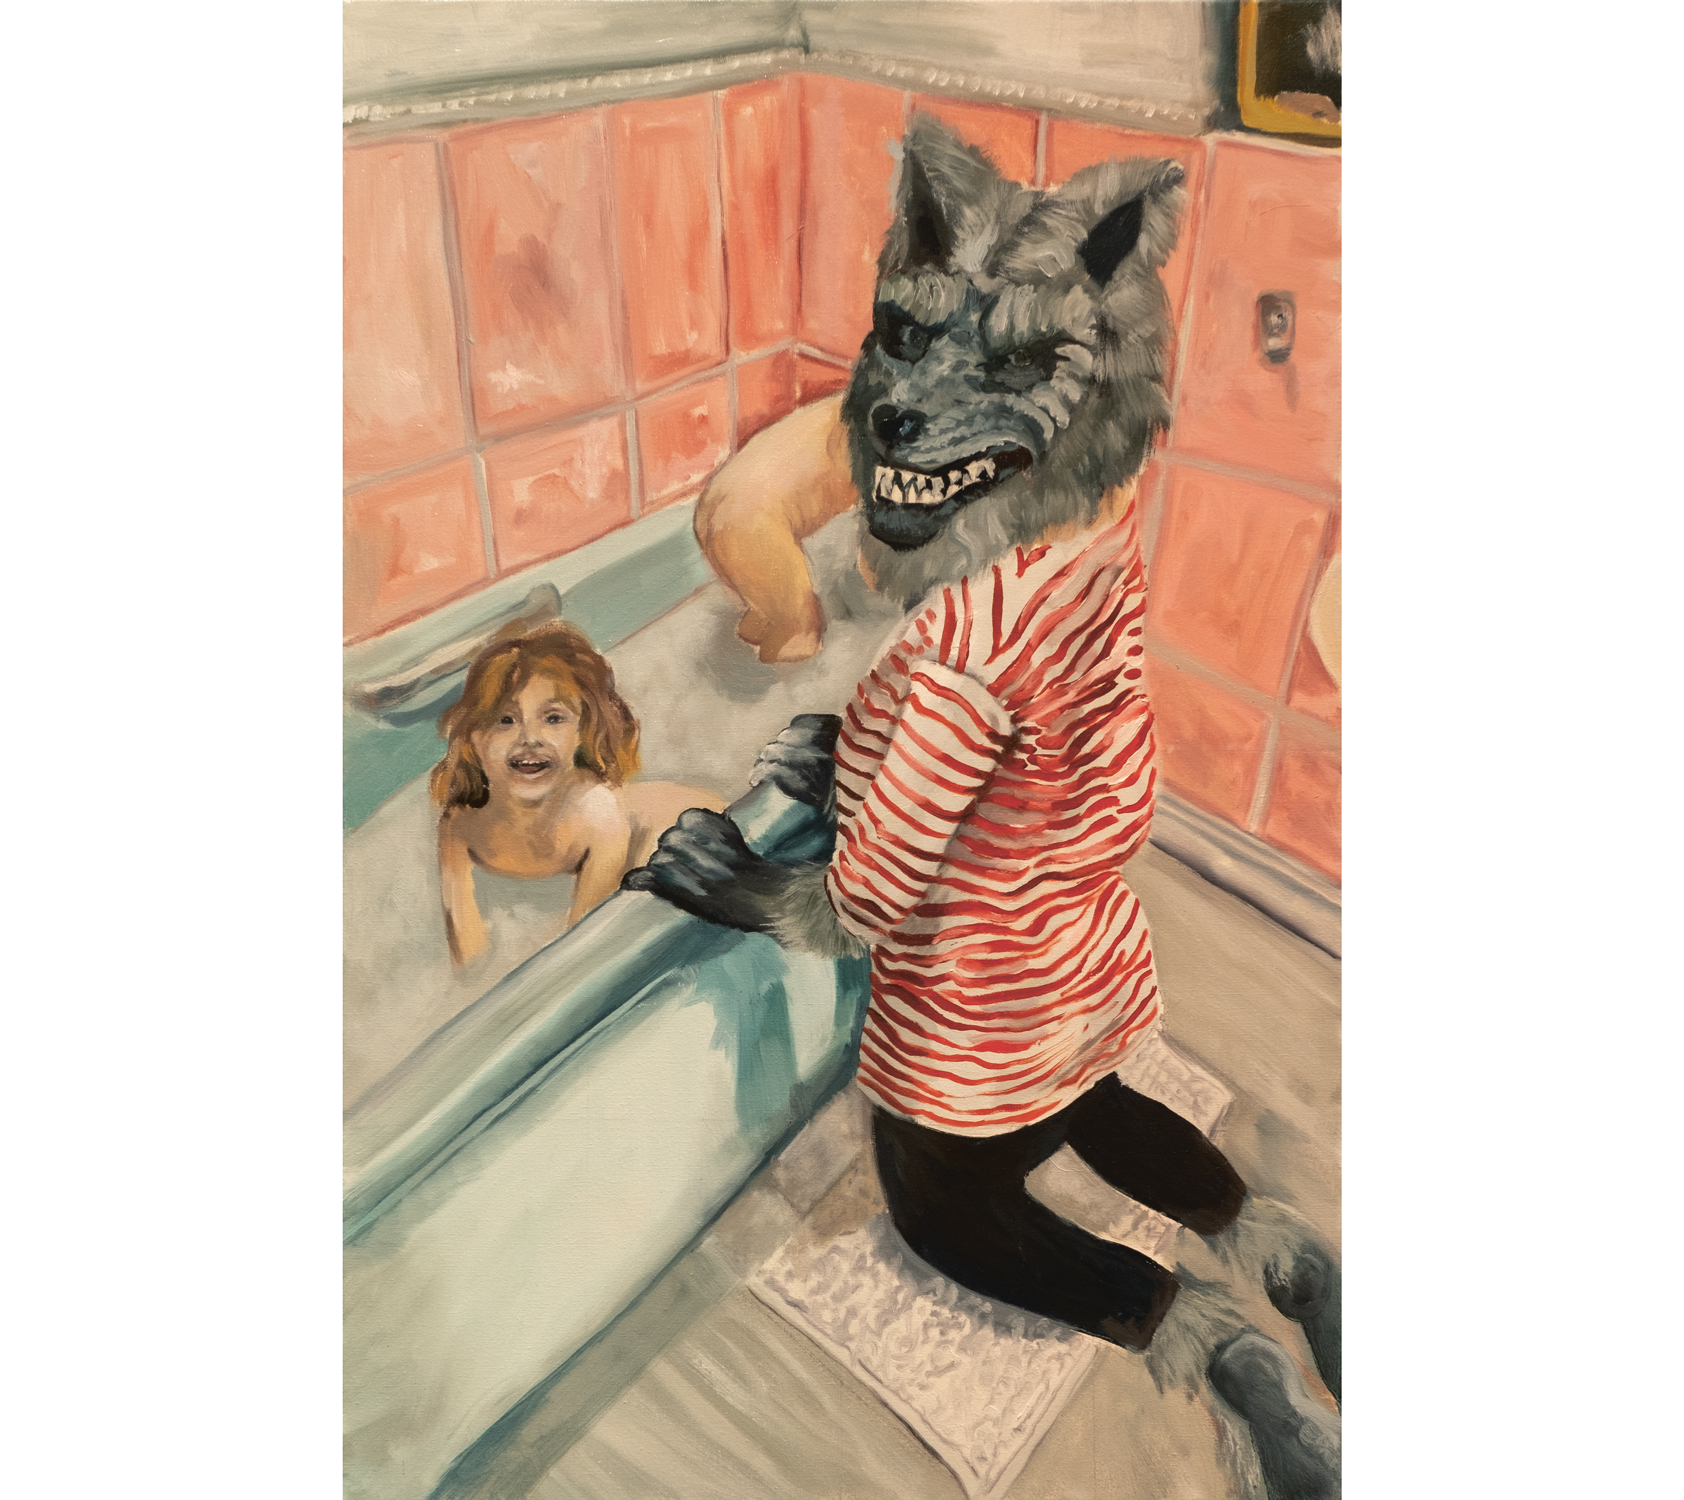 Bathtime with Wolfie, 2021. Courtesy of Lindsey Mendick and Cooke Latham Gallery, London 